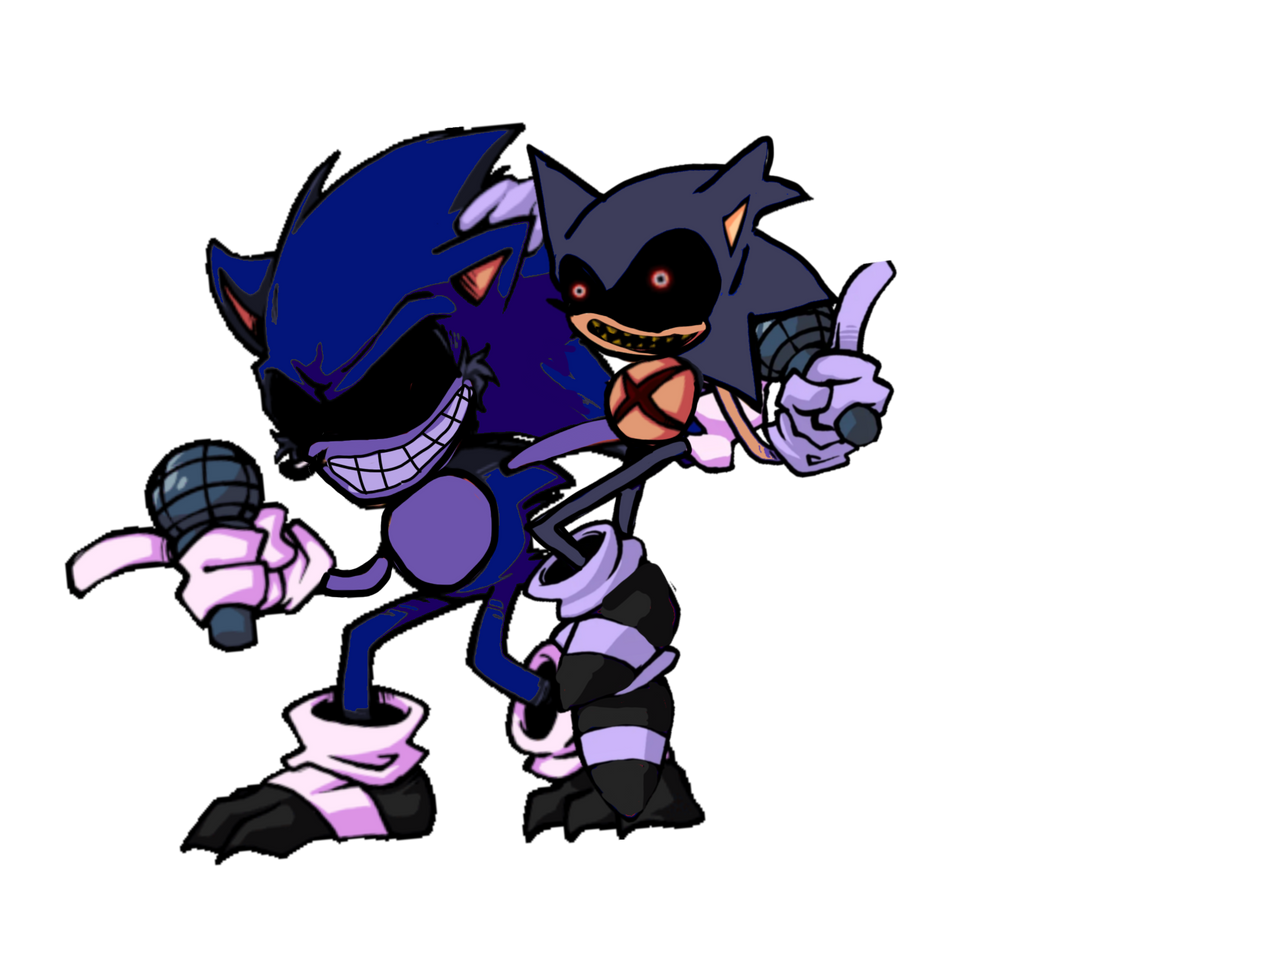 Sonic.Exe, Majin Sonic and Lord X met Old-Past one by Abbysek on